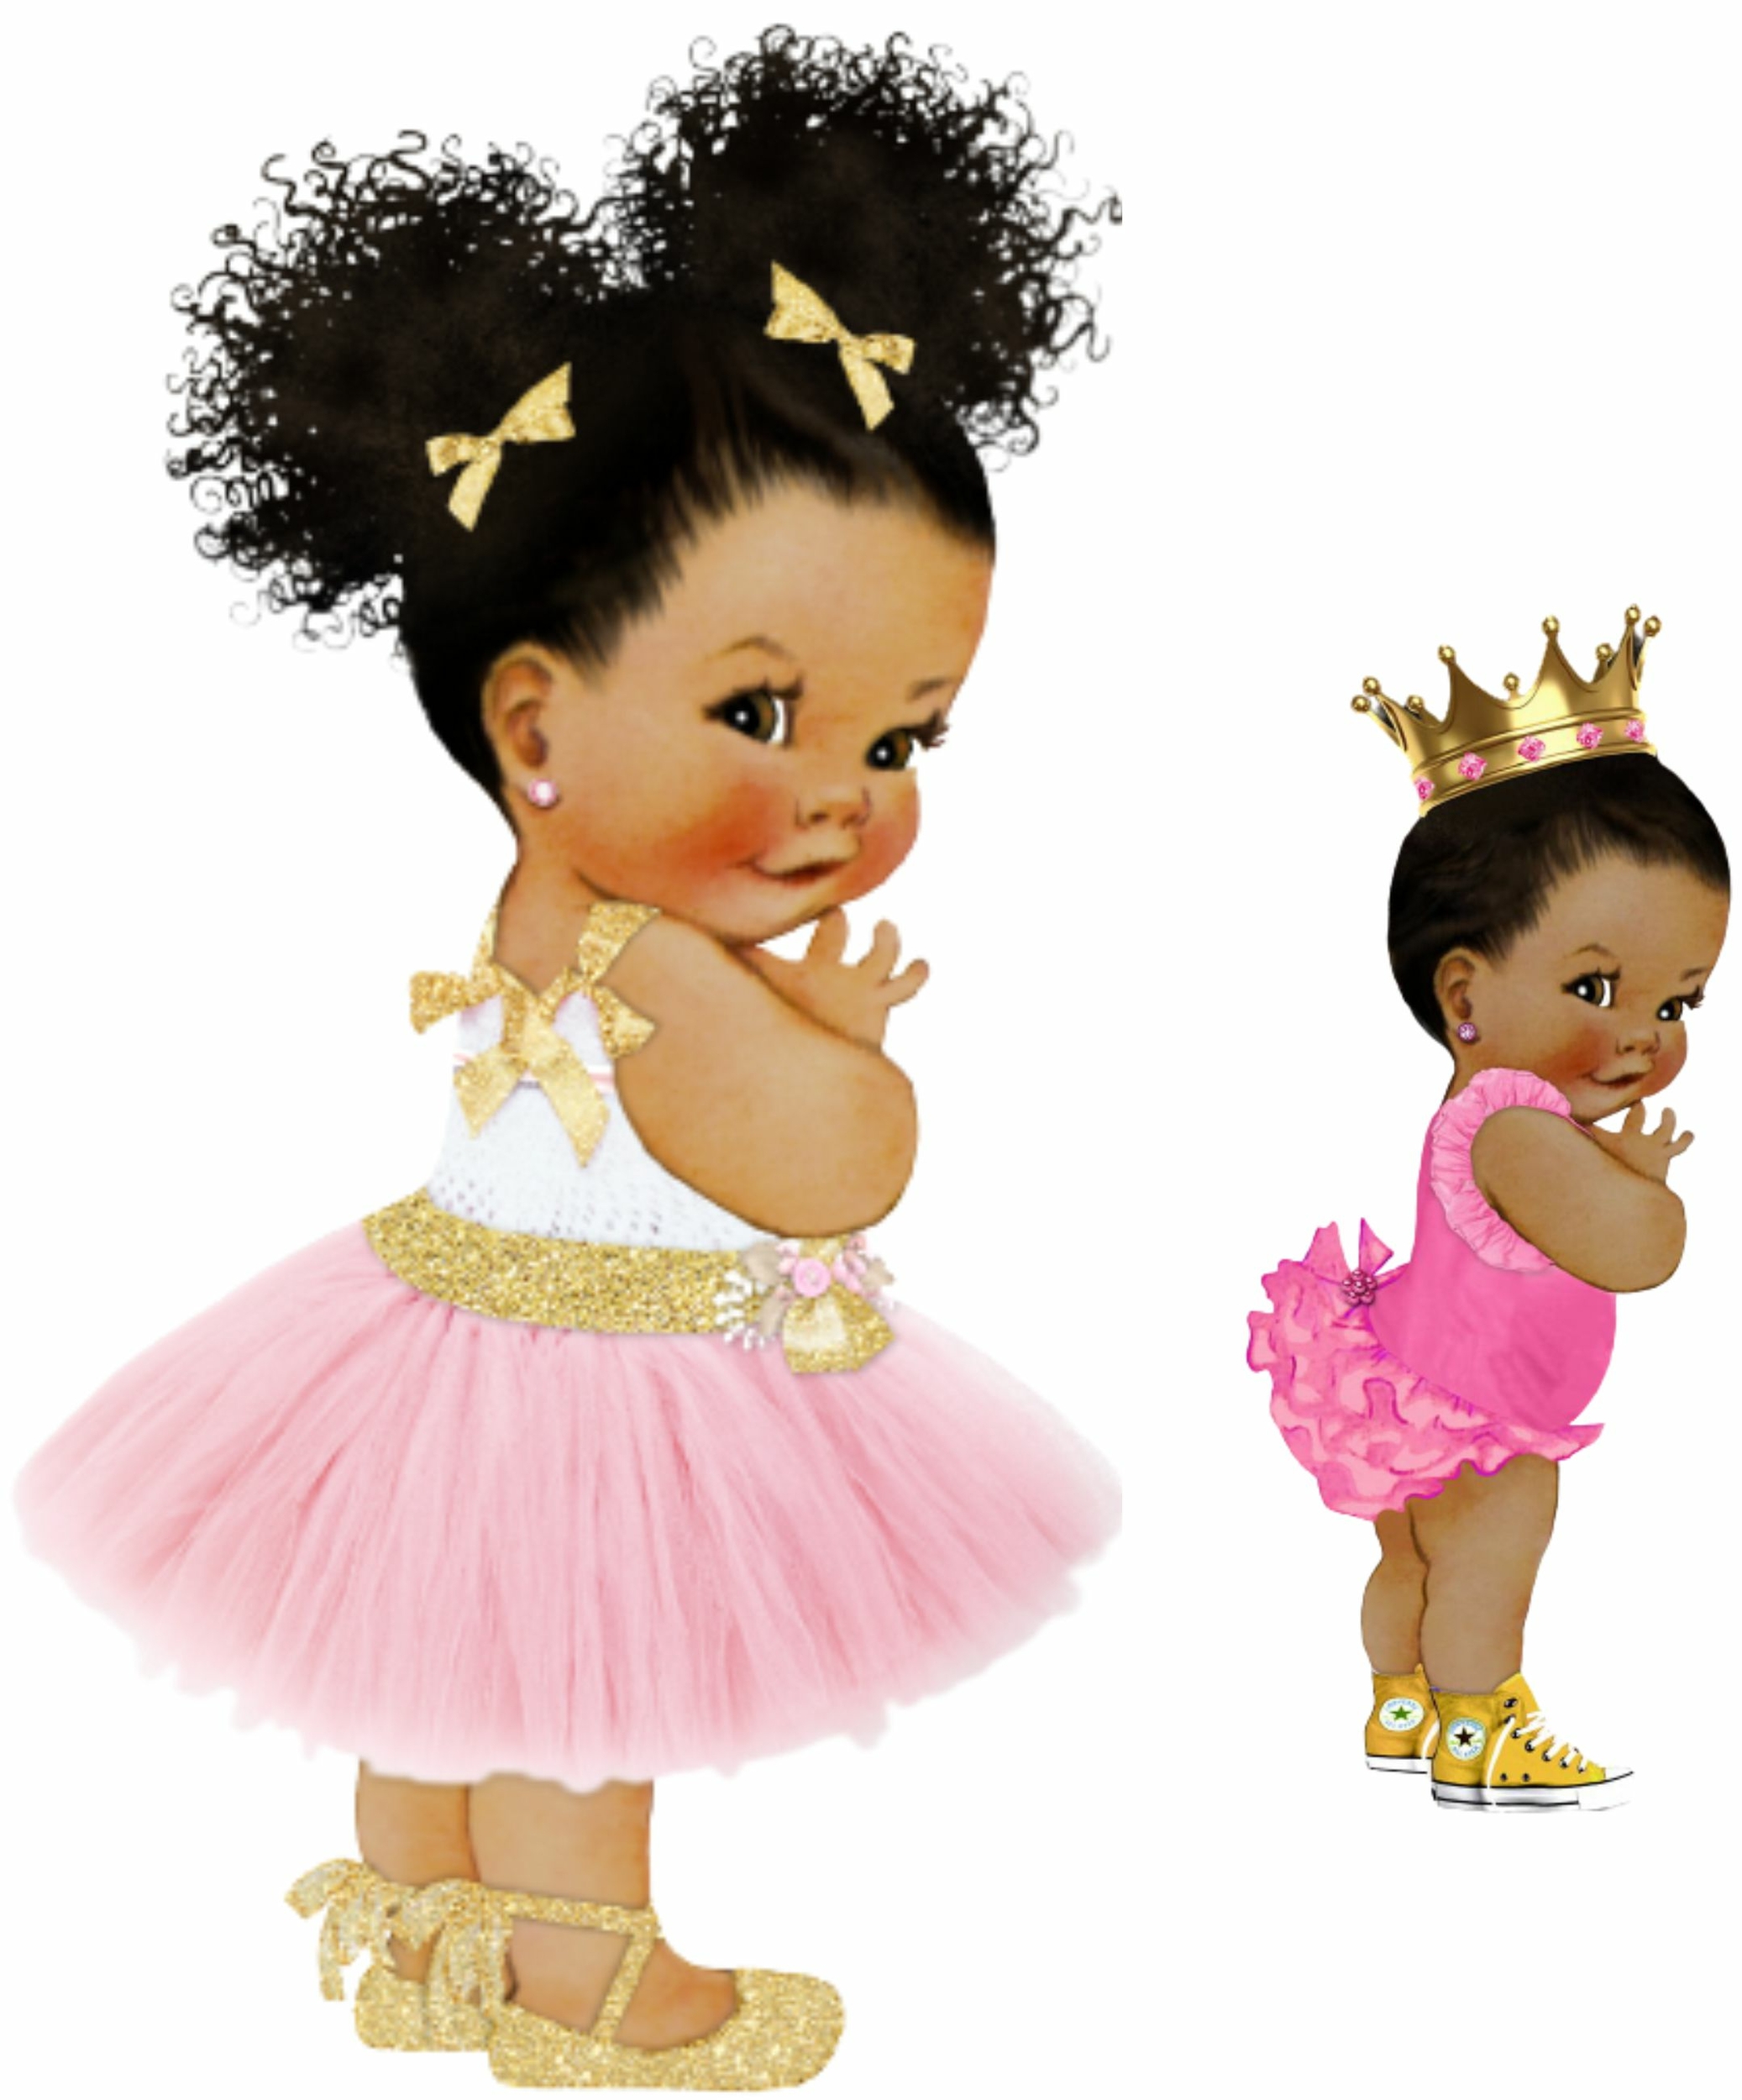 Impression Alimentaire - Fille Afro - Princesse